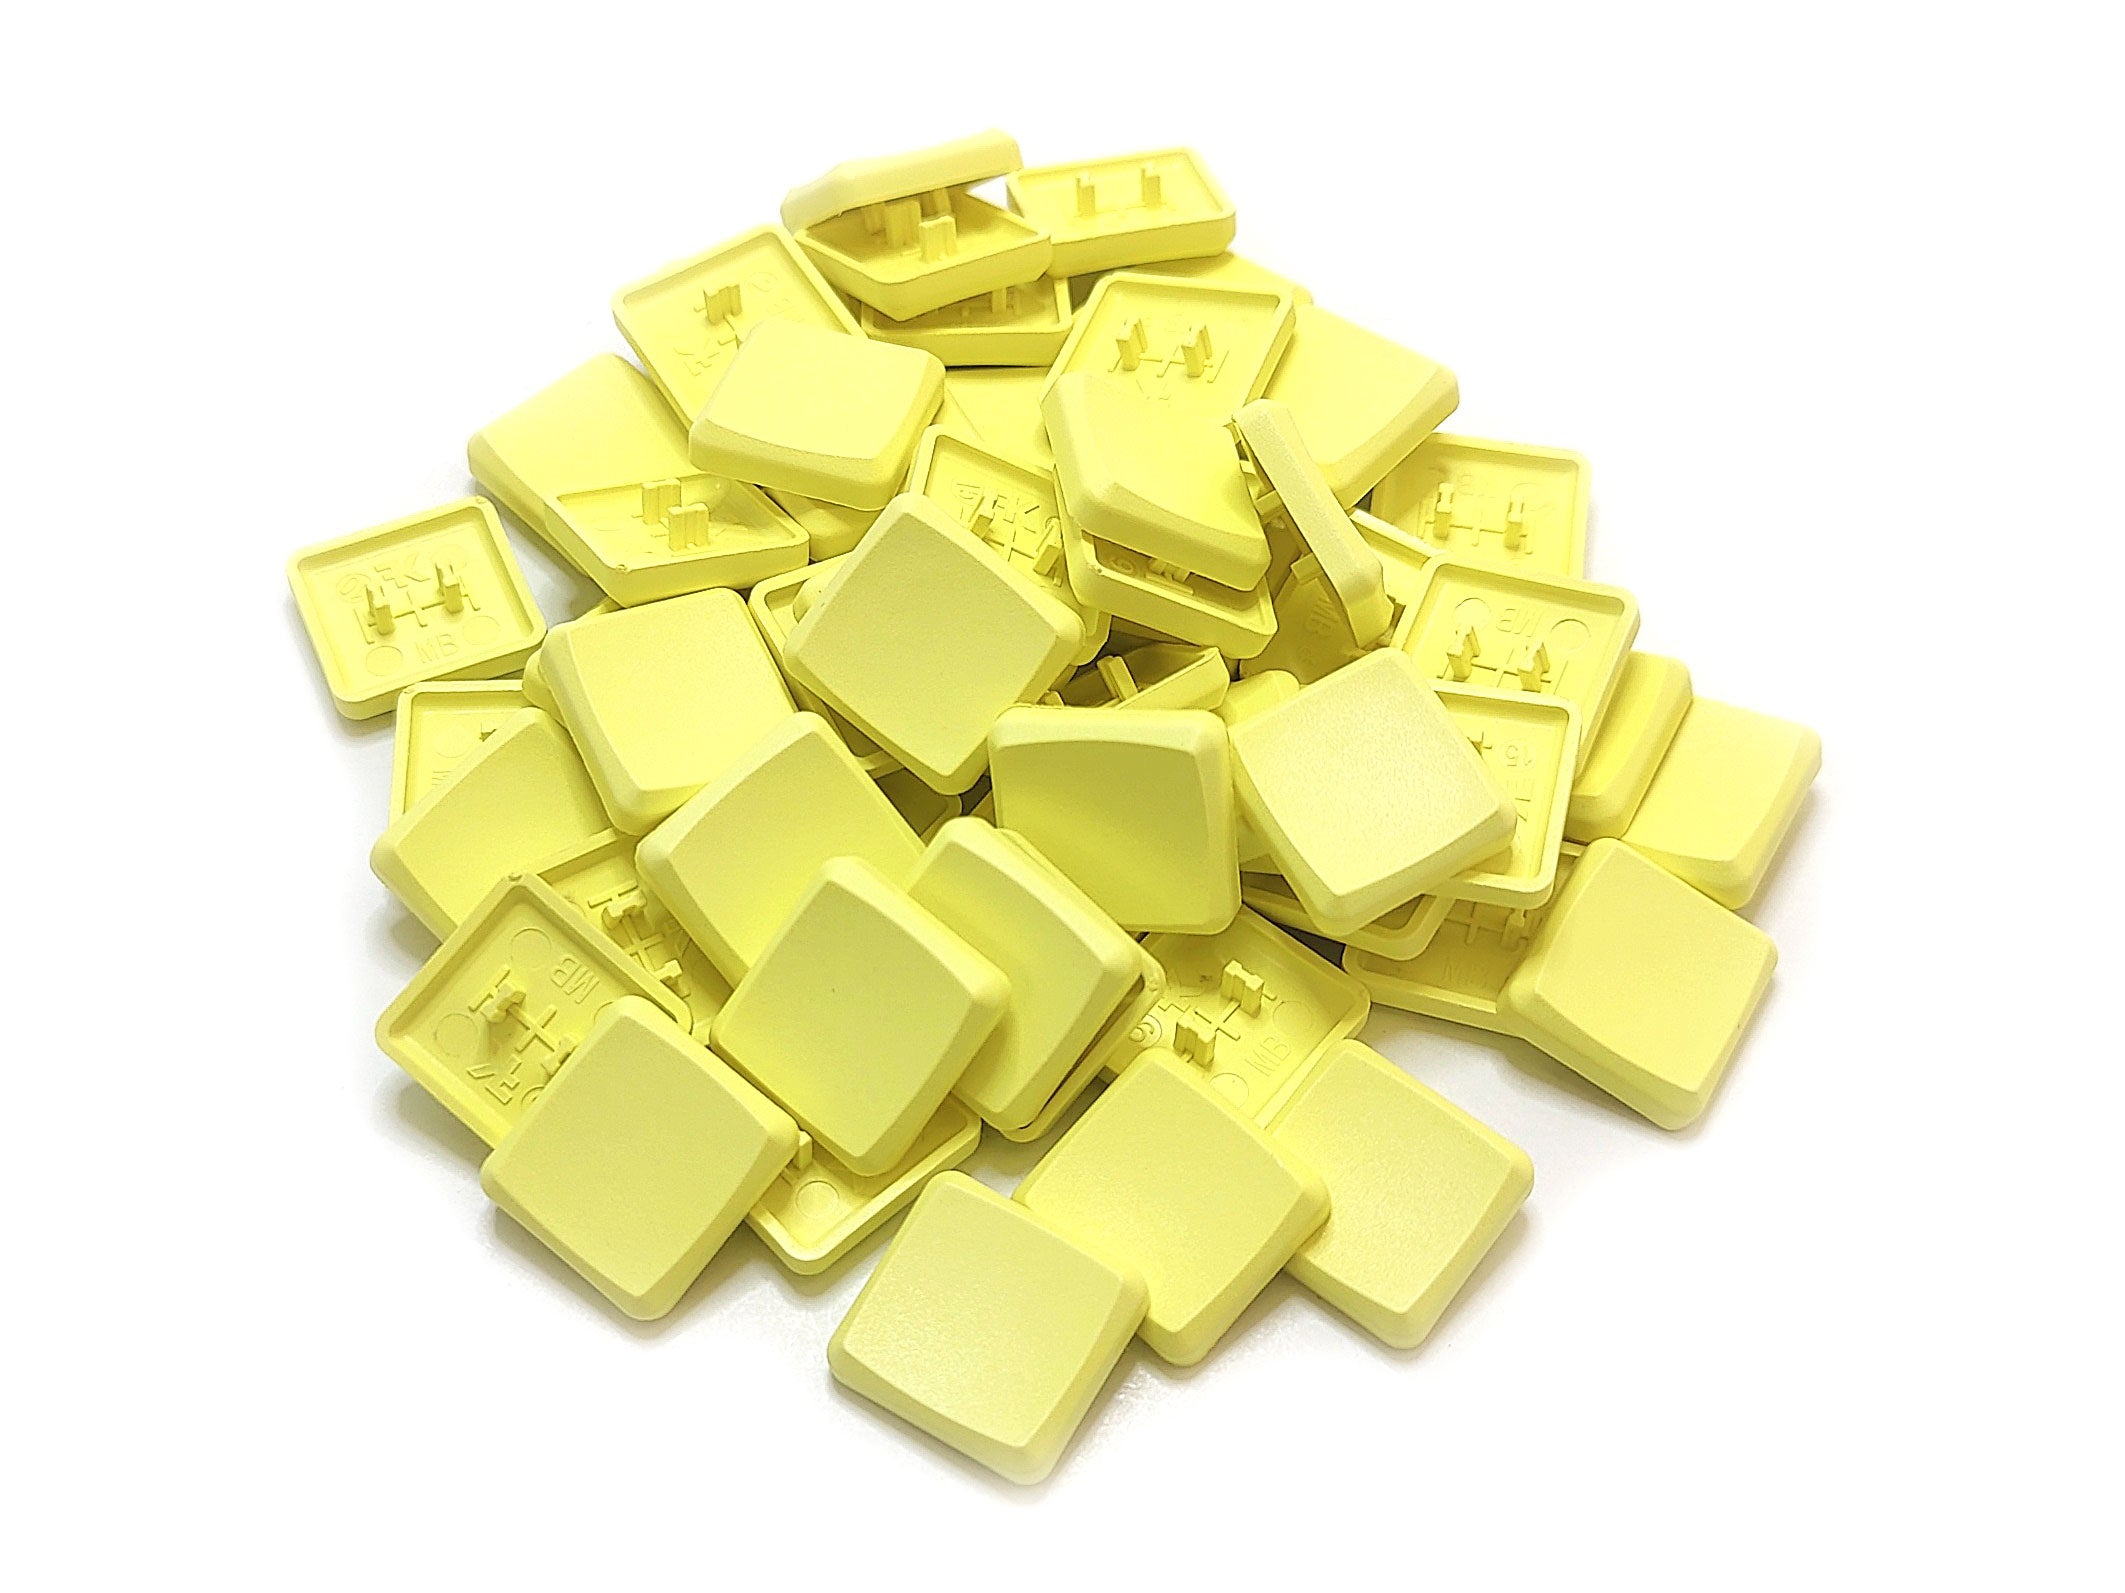 MBK Factory Dyed Blank Keycaps